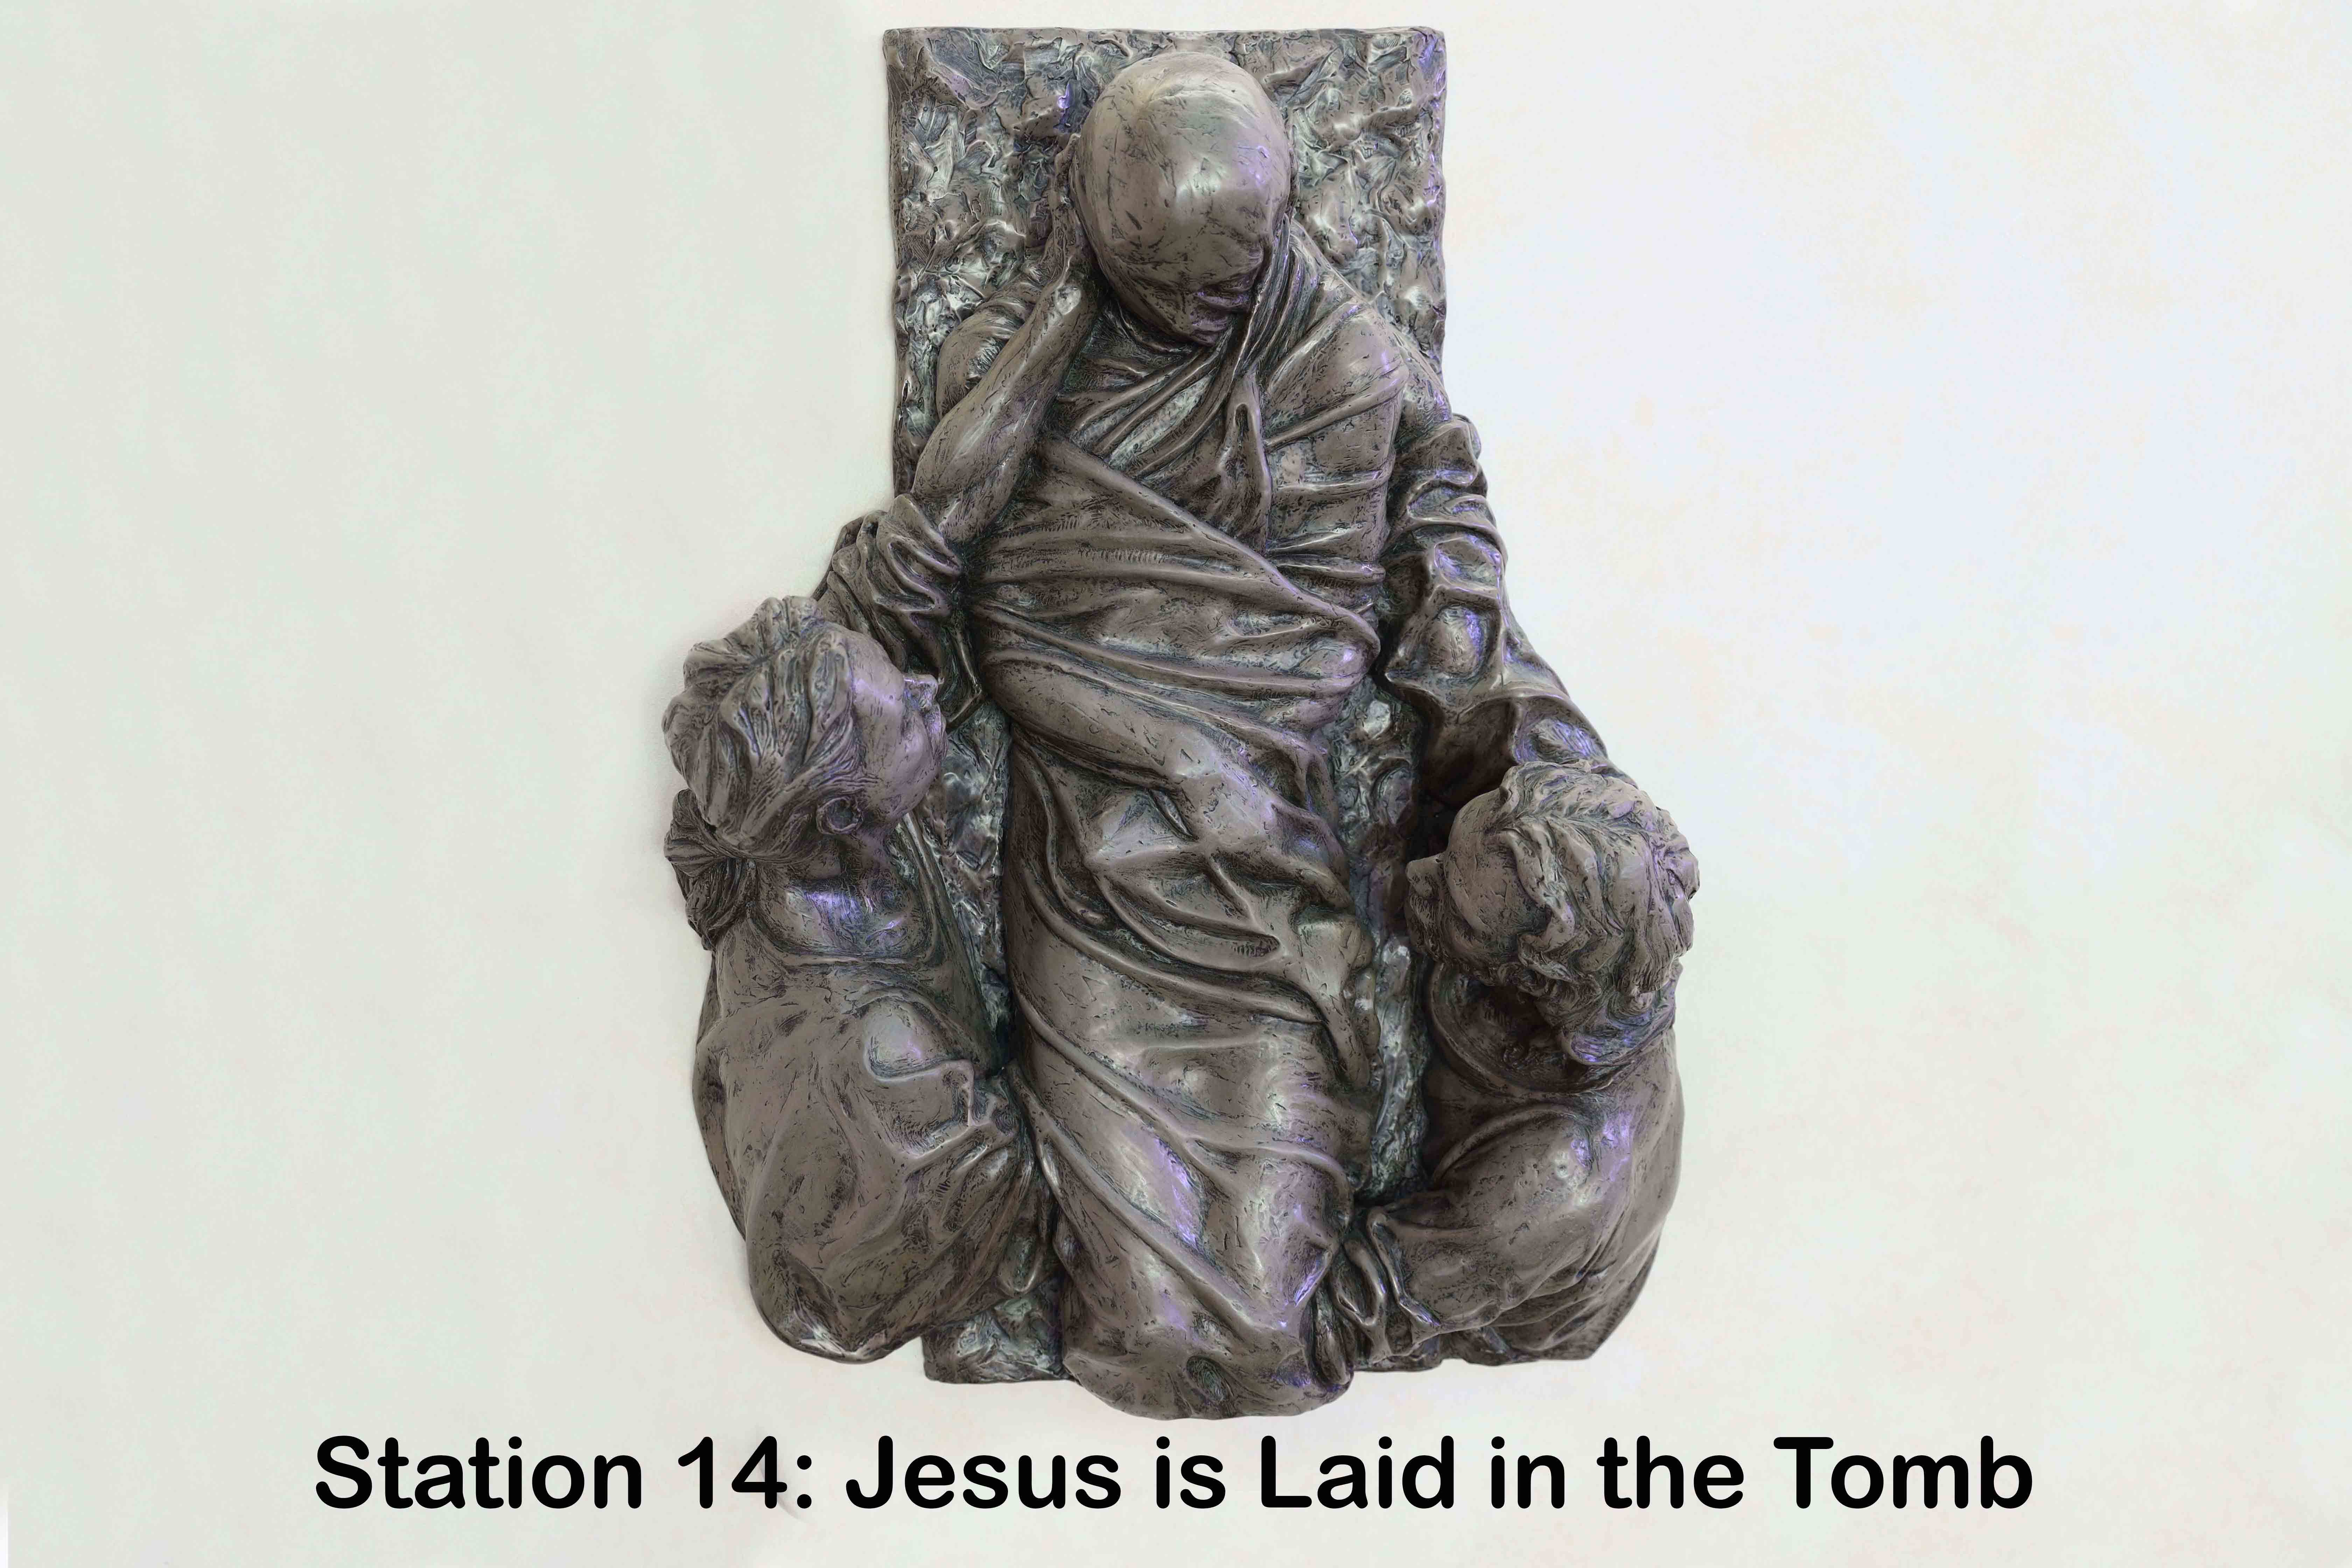 Mark 15:46-47: and (Joseph of Arimathea) laid him in a tomb which had been hewn out of the rock; and he rolled a stone against the door of the tomb.
 47 Mary Magdalene and Mary the mother of Joses saw where he was laid.
Mark 16:1-4: And when the sabbath was past, Mary Magdalene, and Mary the mother of James, and Salome, bought spices, so that they might go and anoint him.
 2 And very early on the first day of the week they went to the tomb when the sun had risen.
 3 And they were saying to one another, ‘Who will roll away the stone for us from the door of the tomb?’
 4 And looking up, they saw that the stone was rolled back; -- it was very large.
